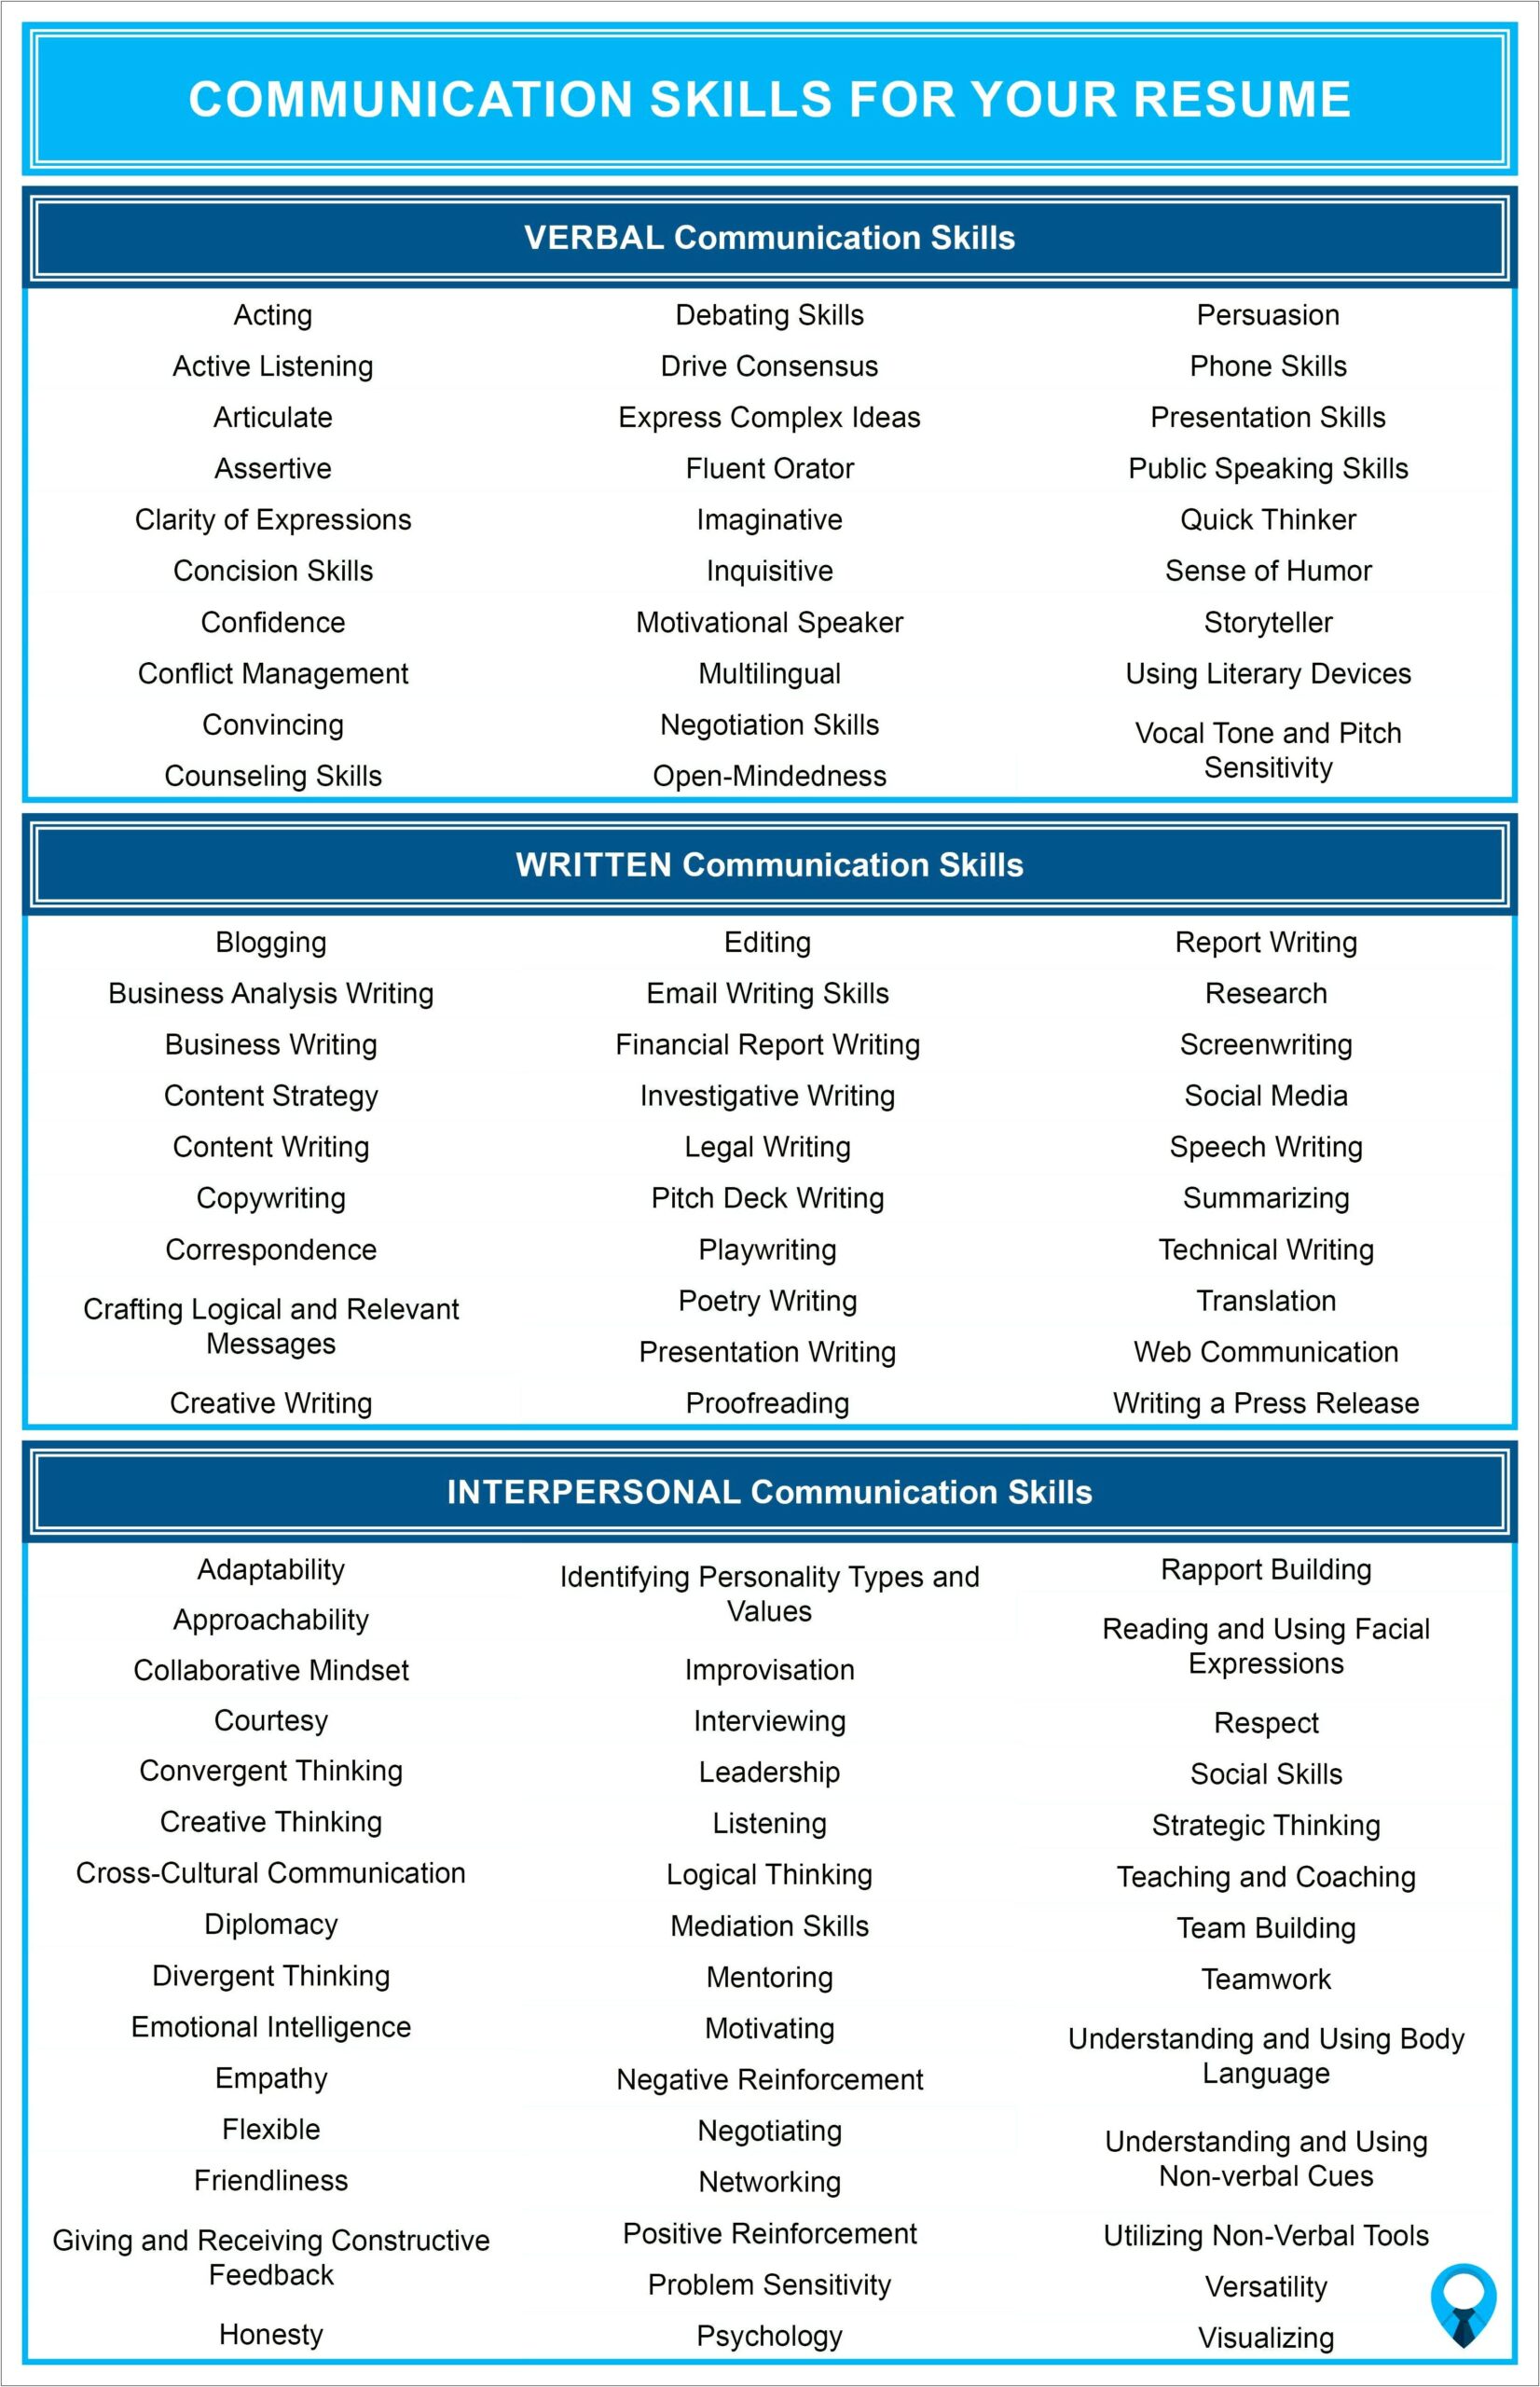 Personal Skills And Attributes For Resume